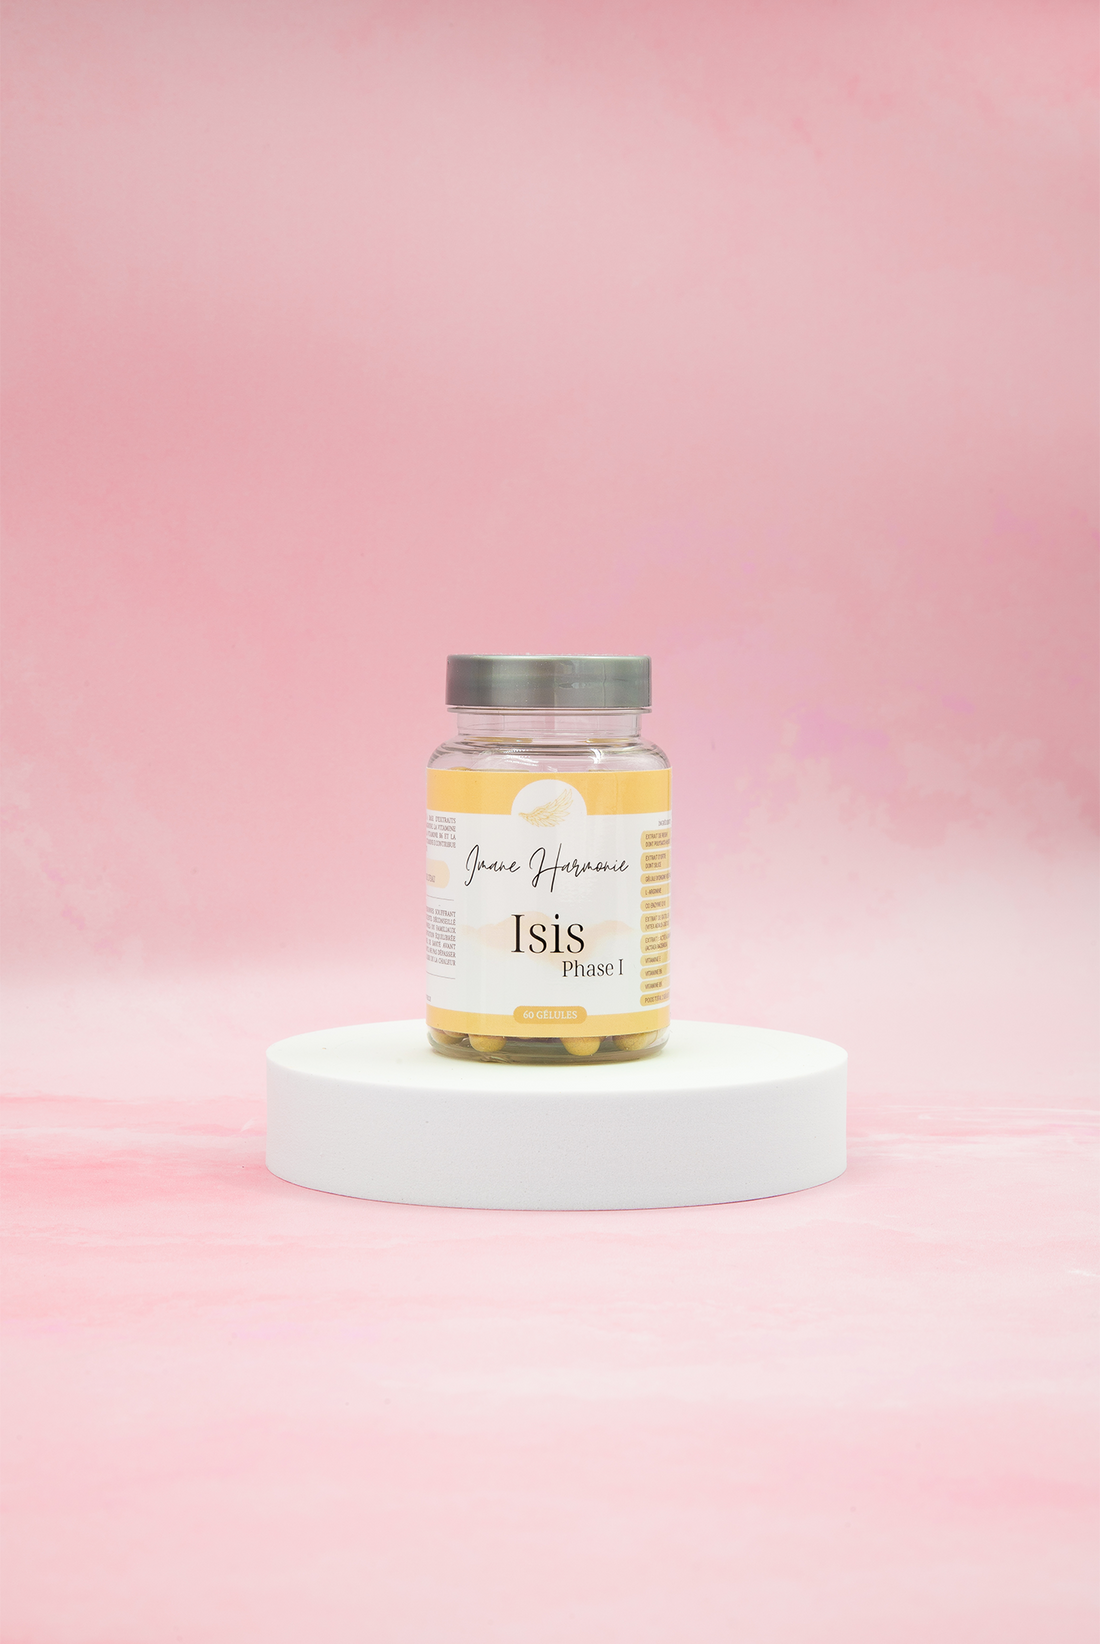 Isis Phase 1 is a dietary supplement designed to boost ovulation in women trying to conceive, especially those with irregular cycles or polycystic ovary syndrome